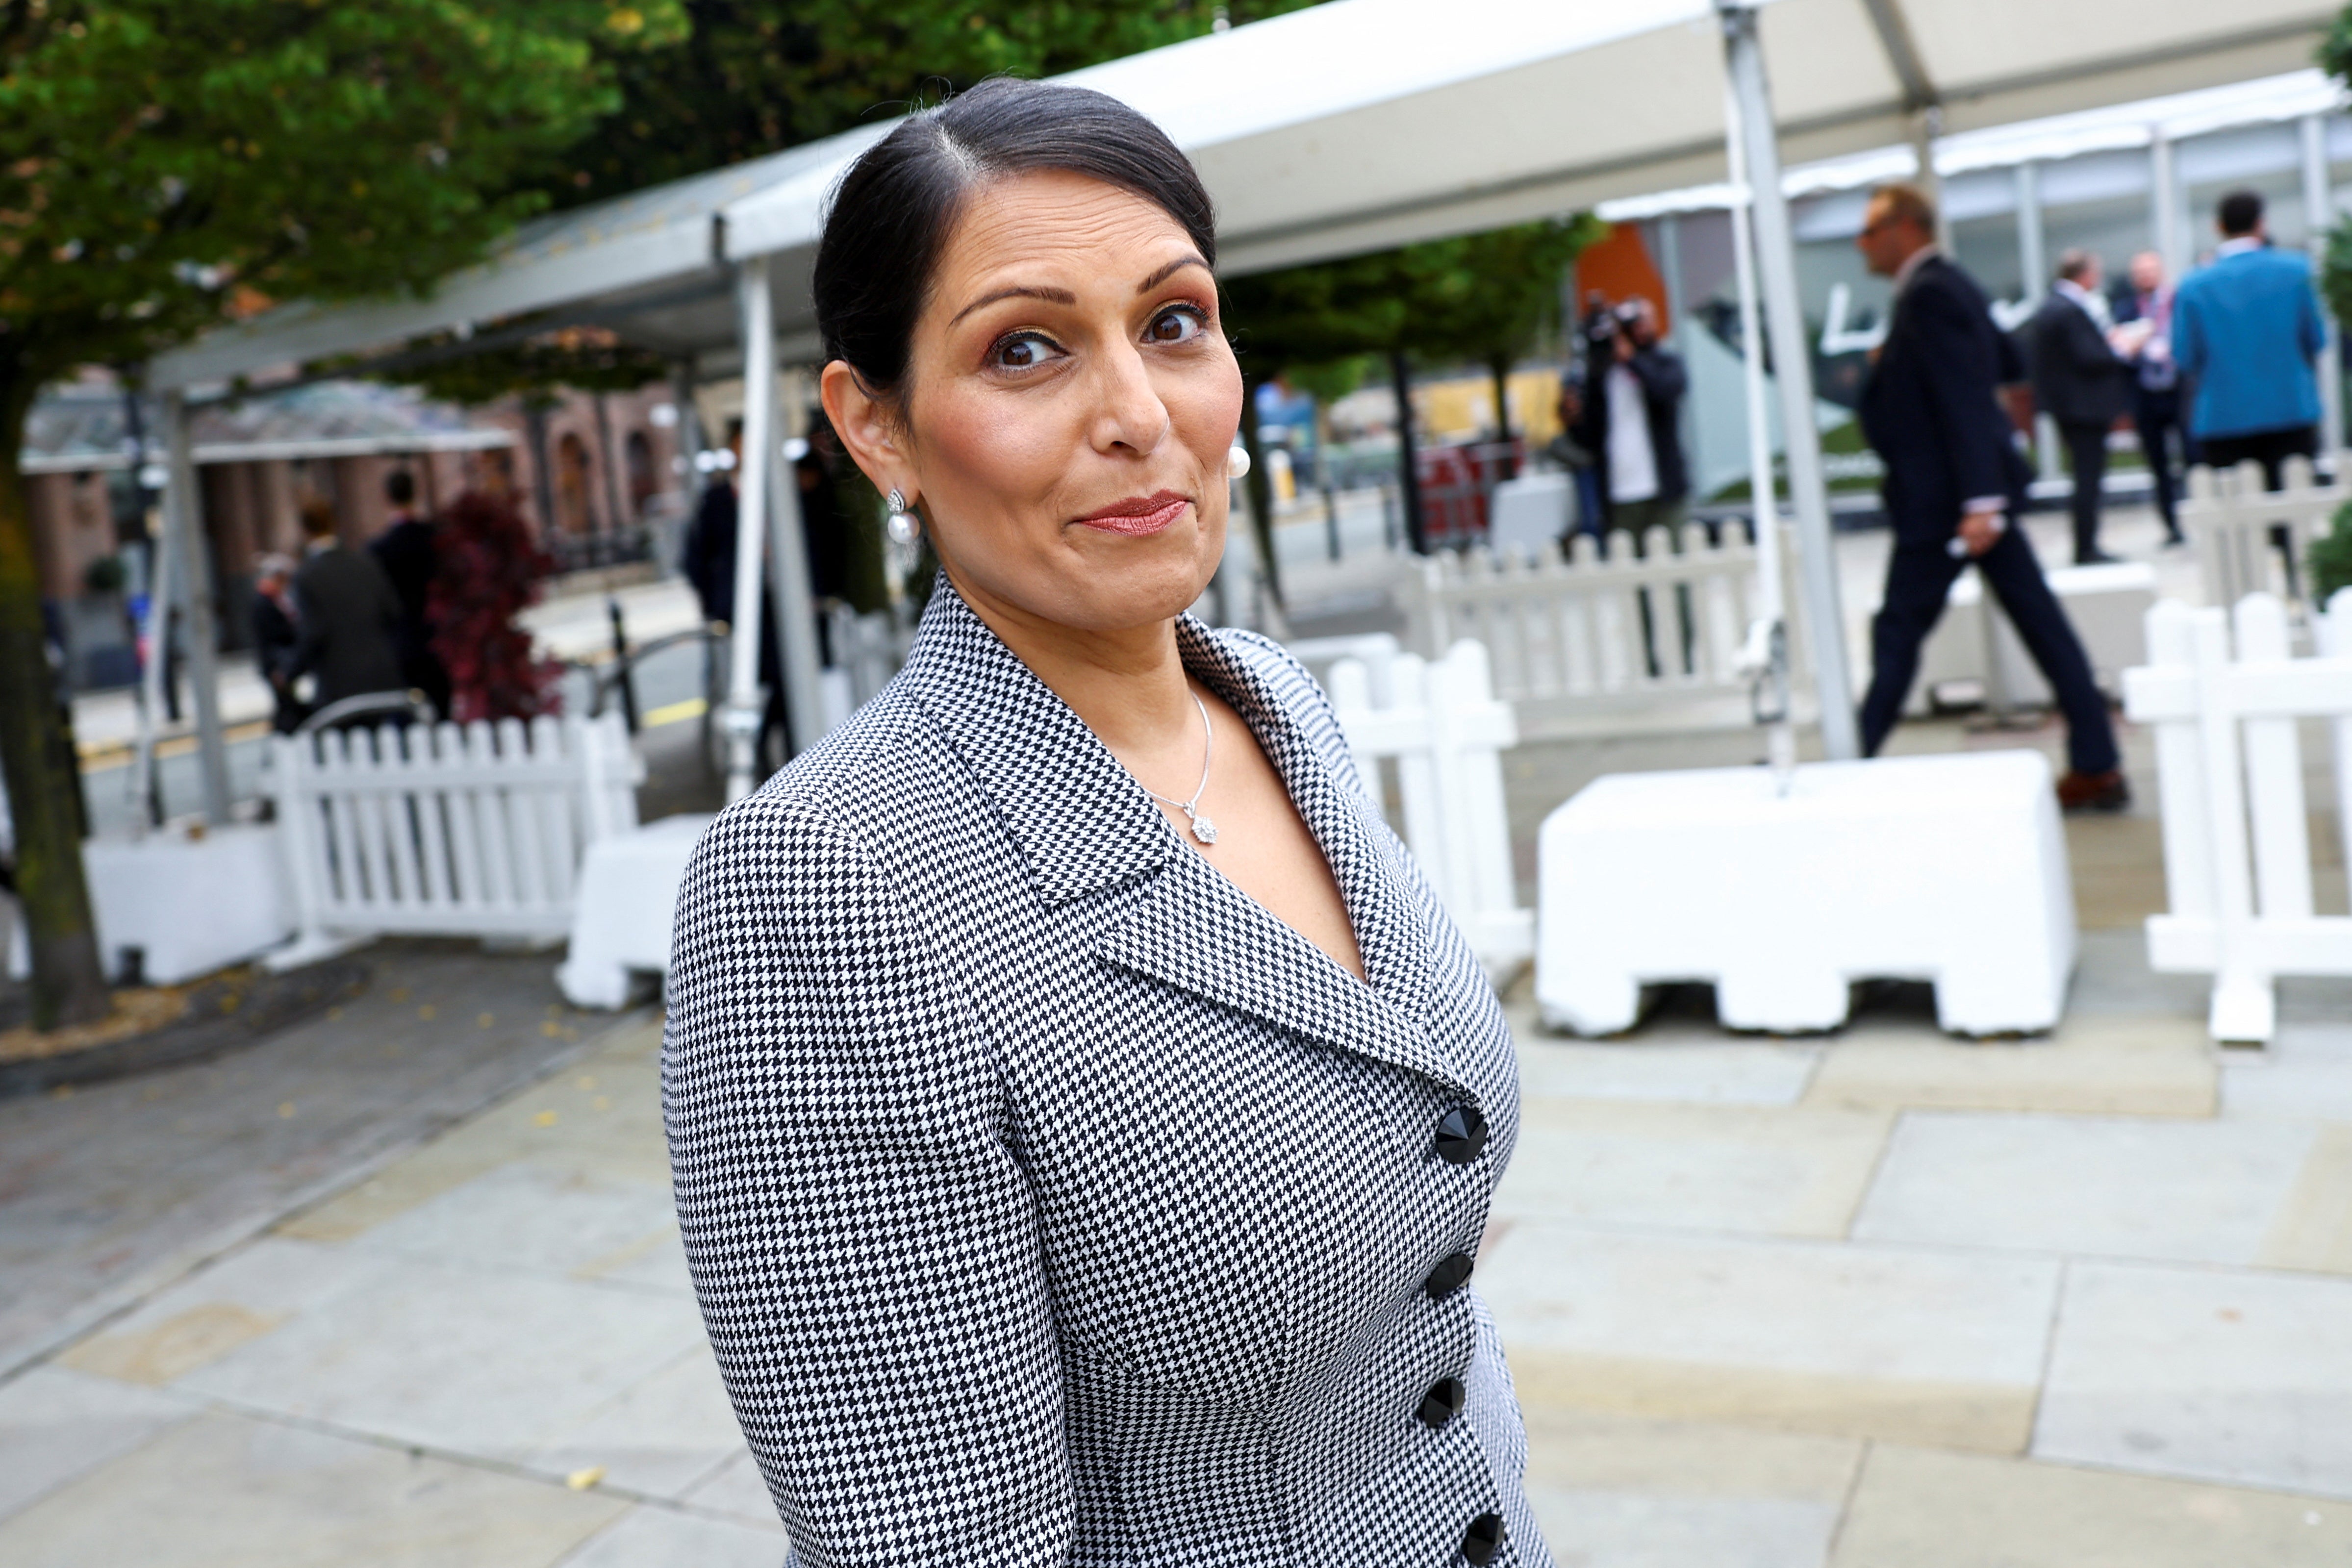 Priti Patel veered into “Alice in Wonderland territory” when she phoned authorities in the US begging them to take Davis’s case, the court heard